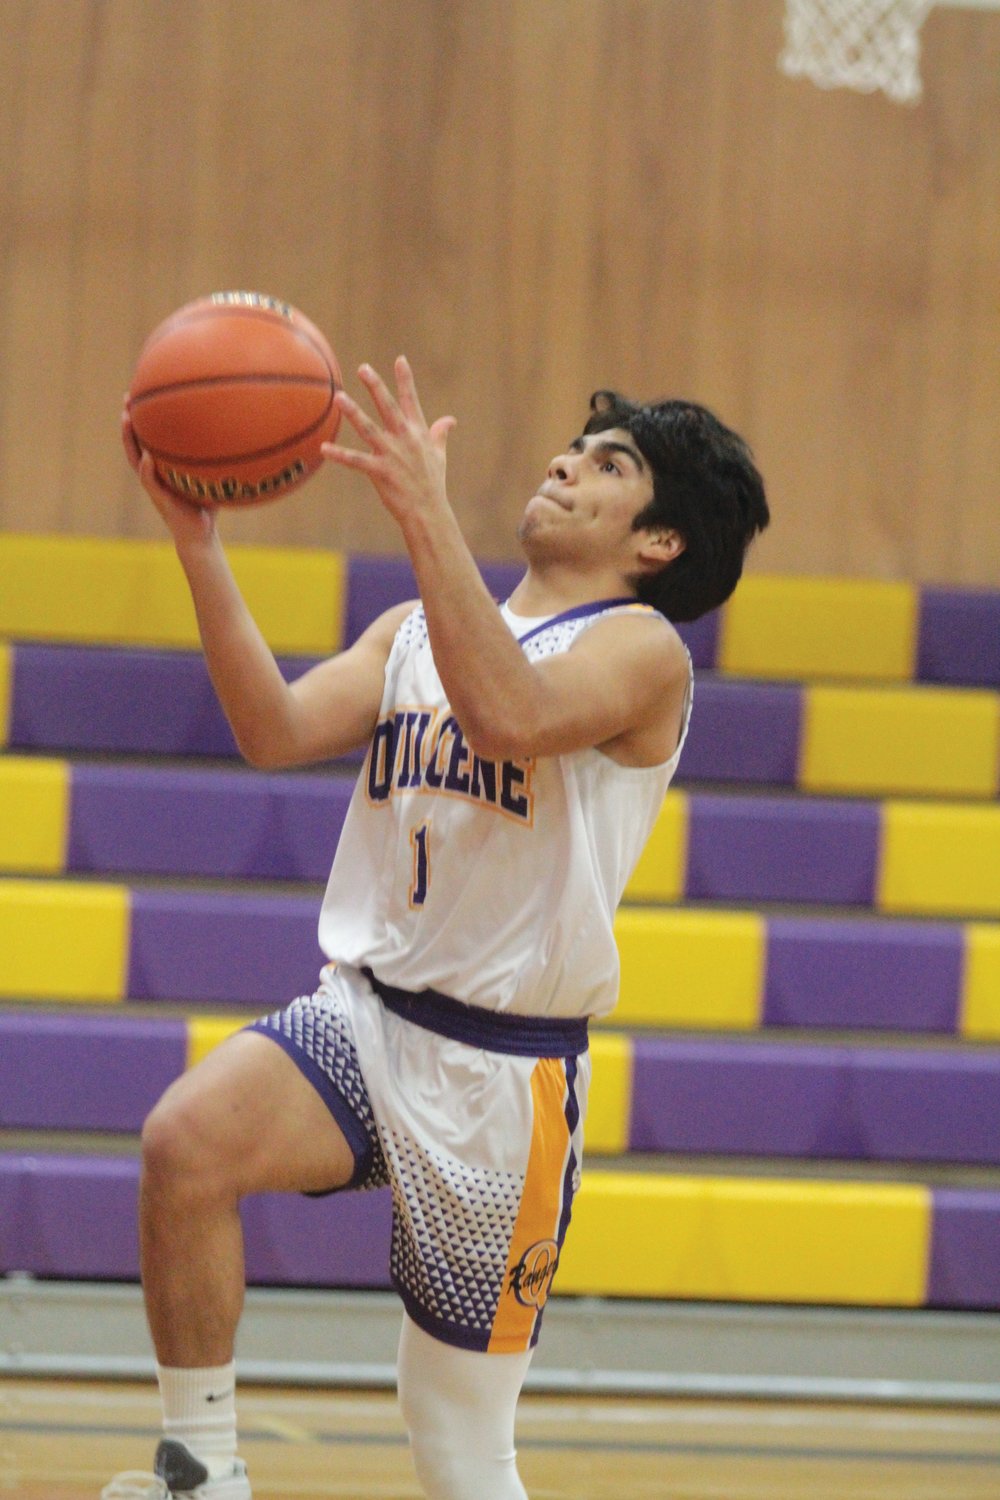 Andrew Perez-Lopez goes coast-to-coast for an uncontested layup for Quilcene in action against the Lions.